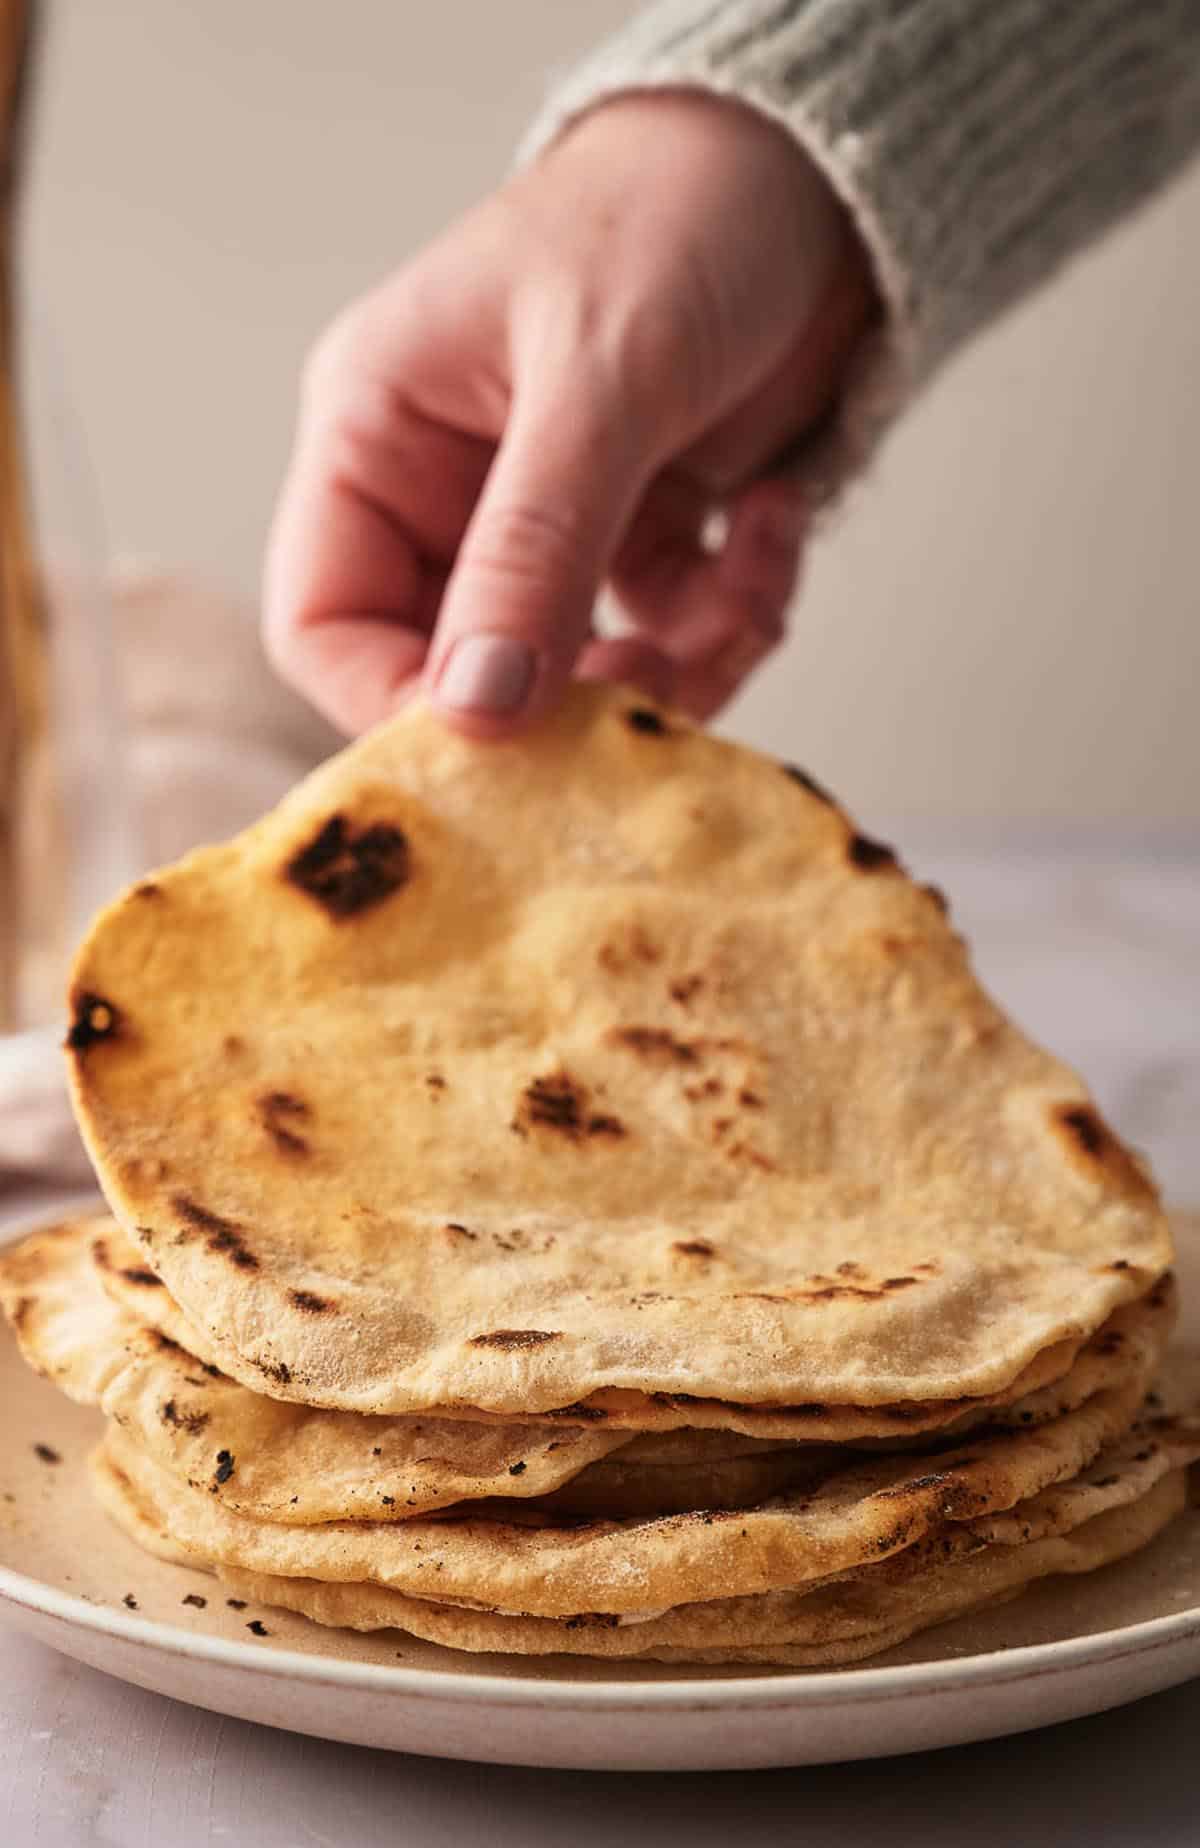 A person grabbing a stack of flatbreads on a plate.